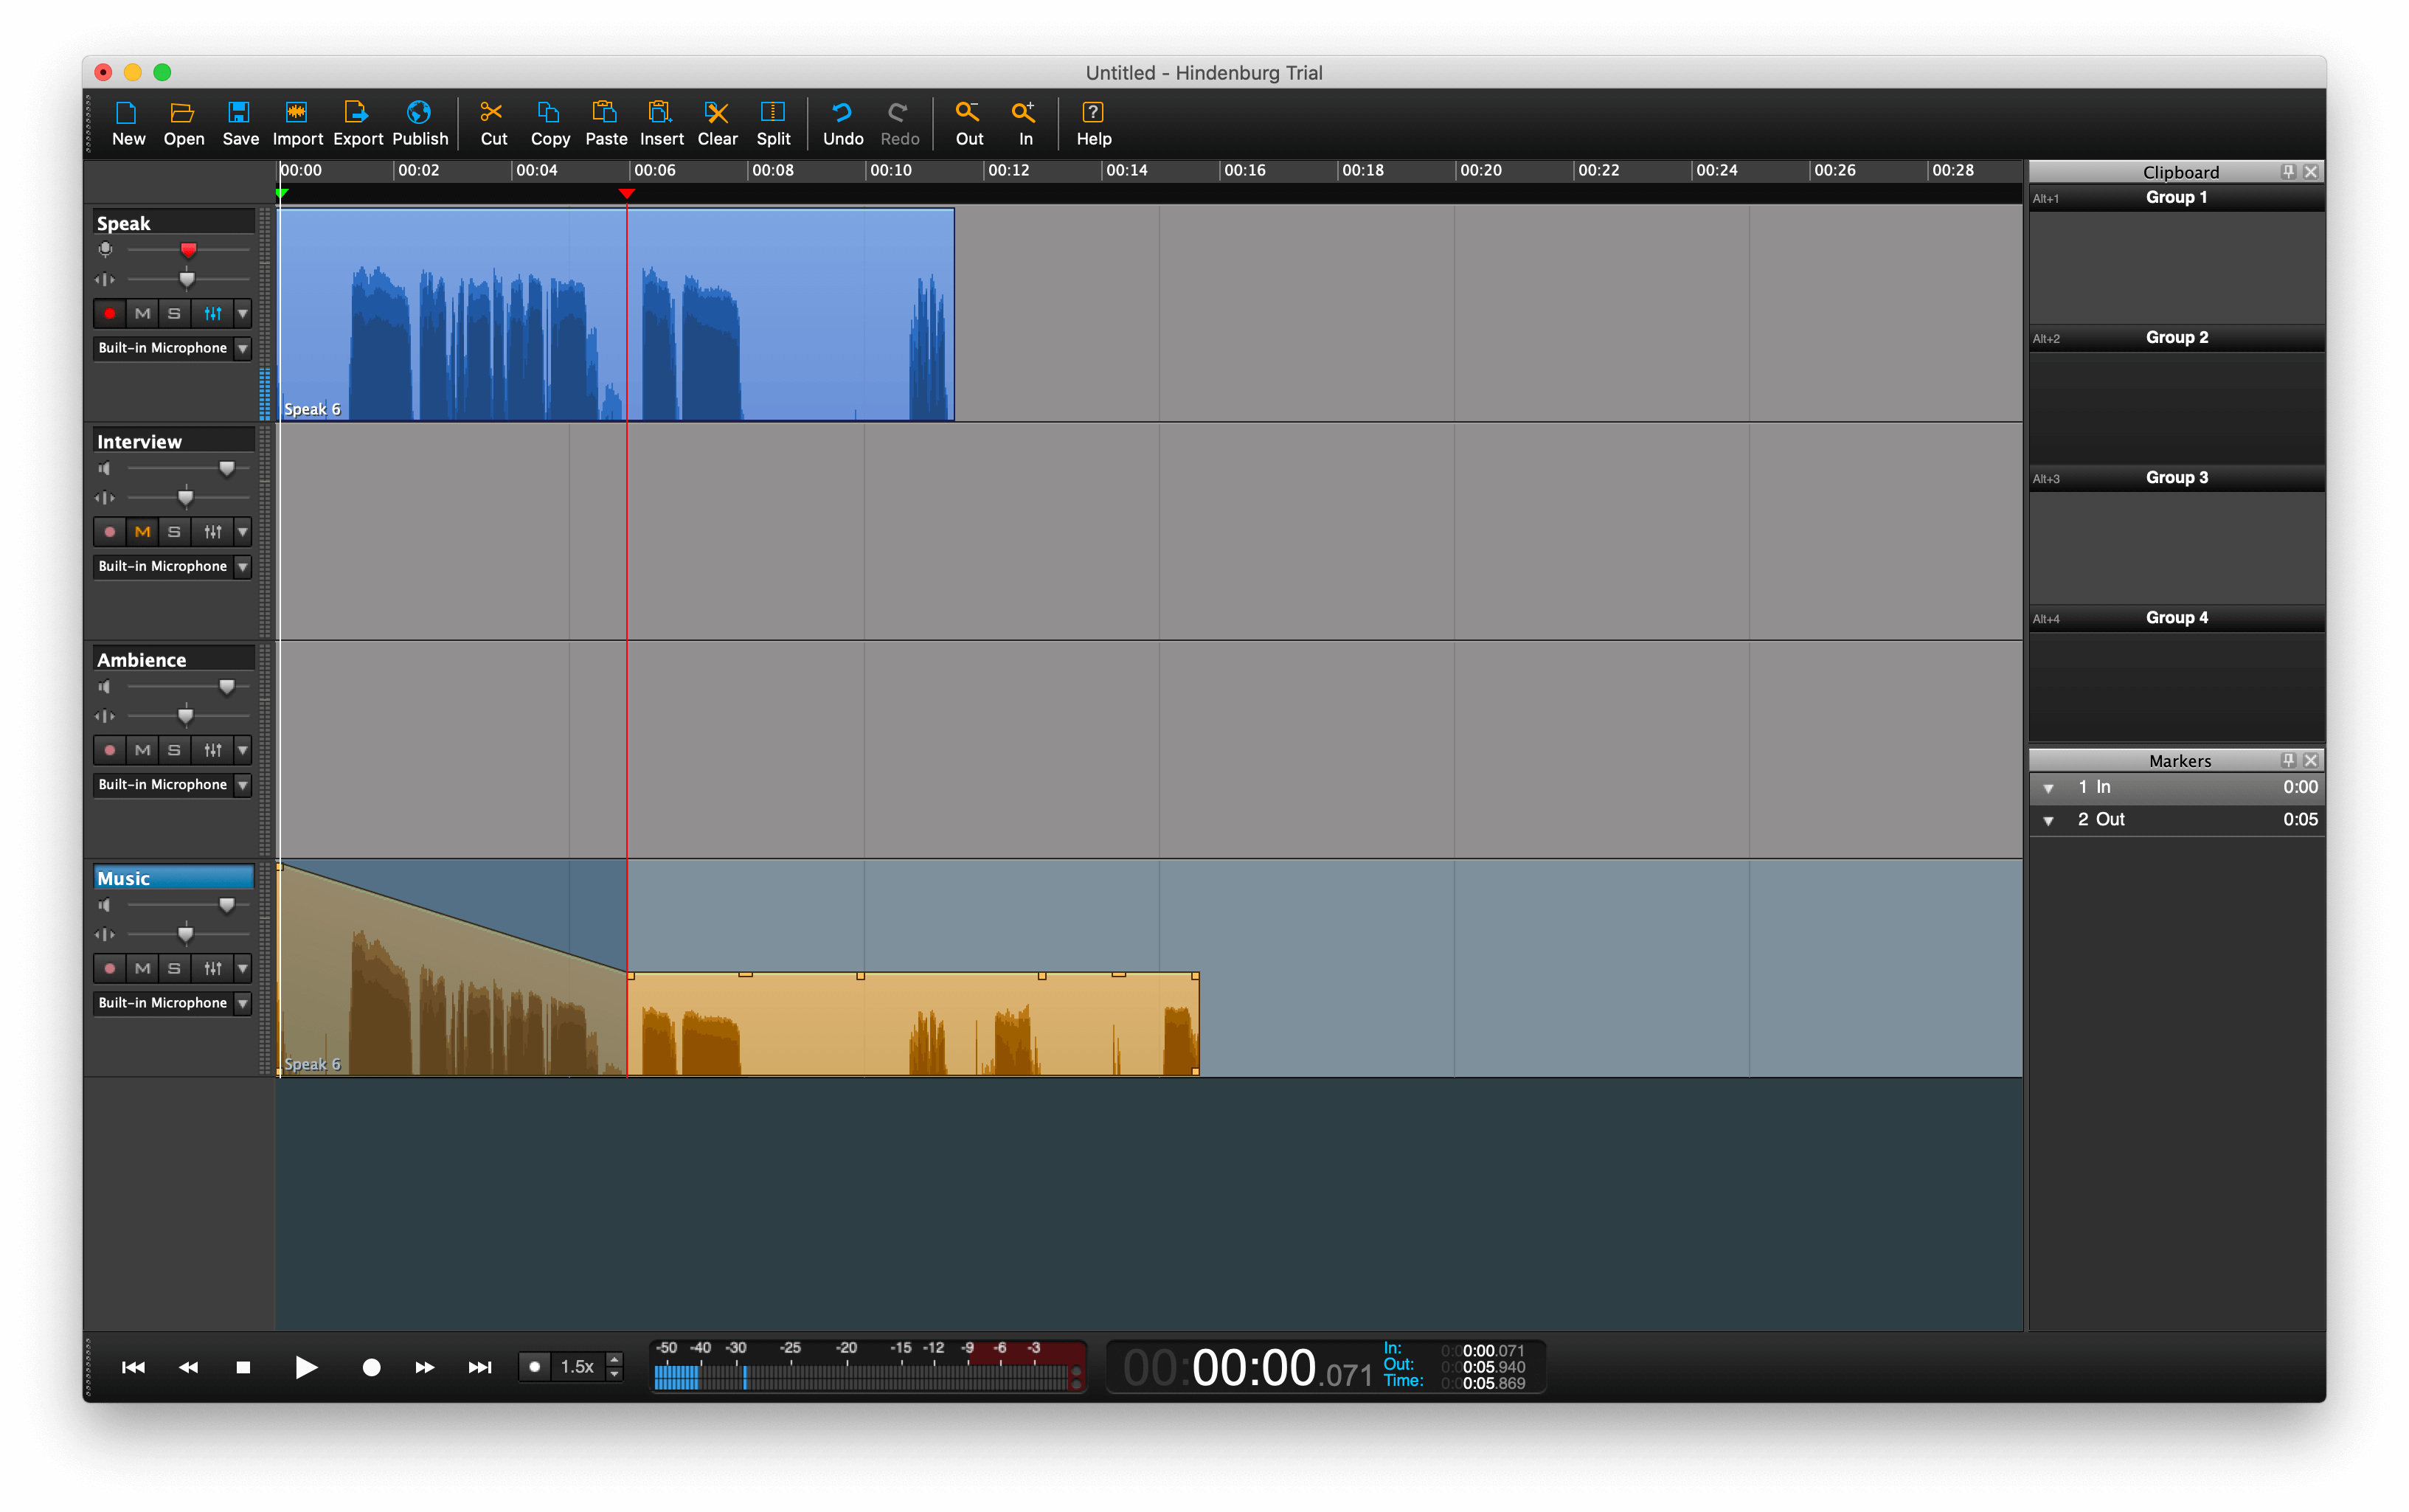 Audio clip fading out